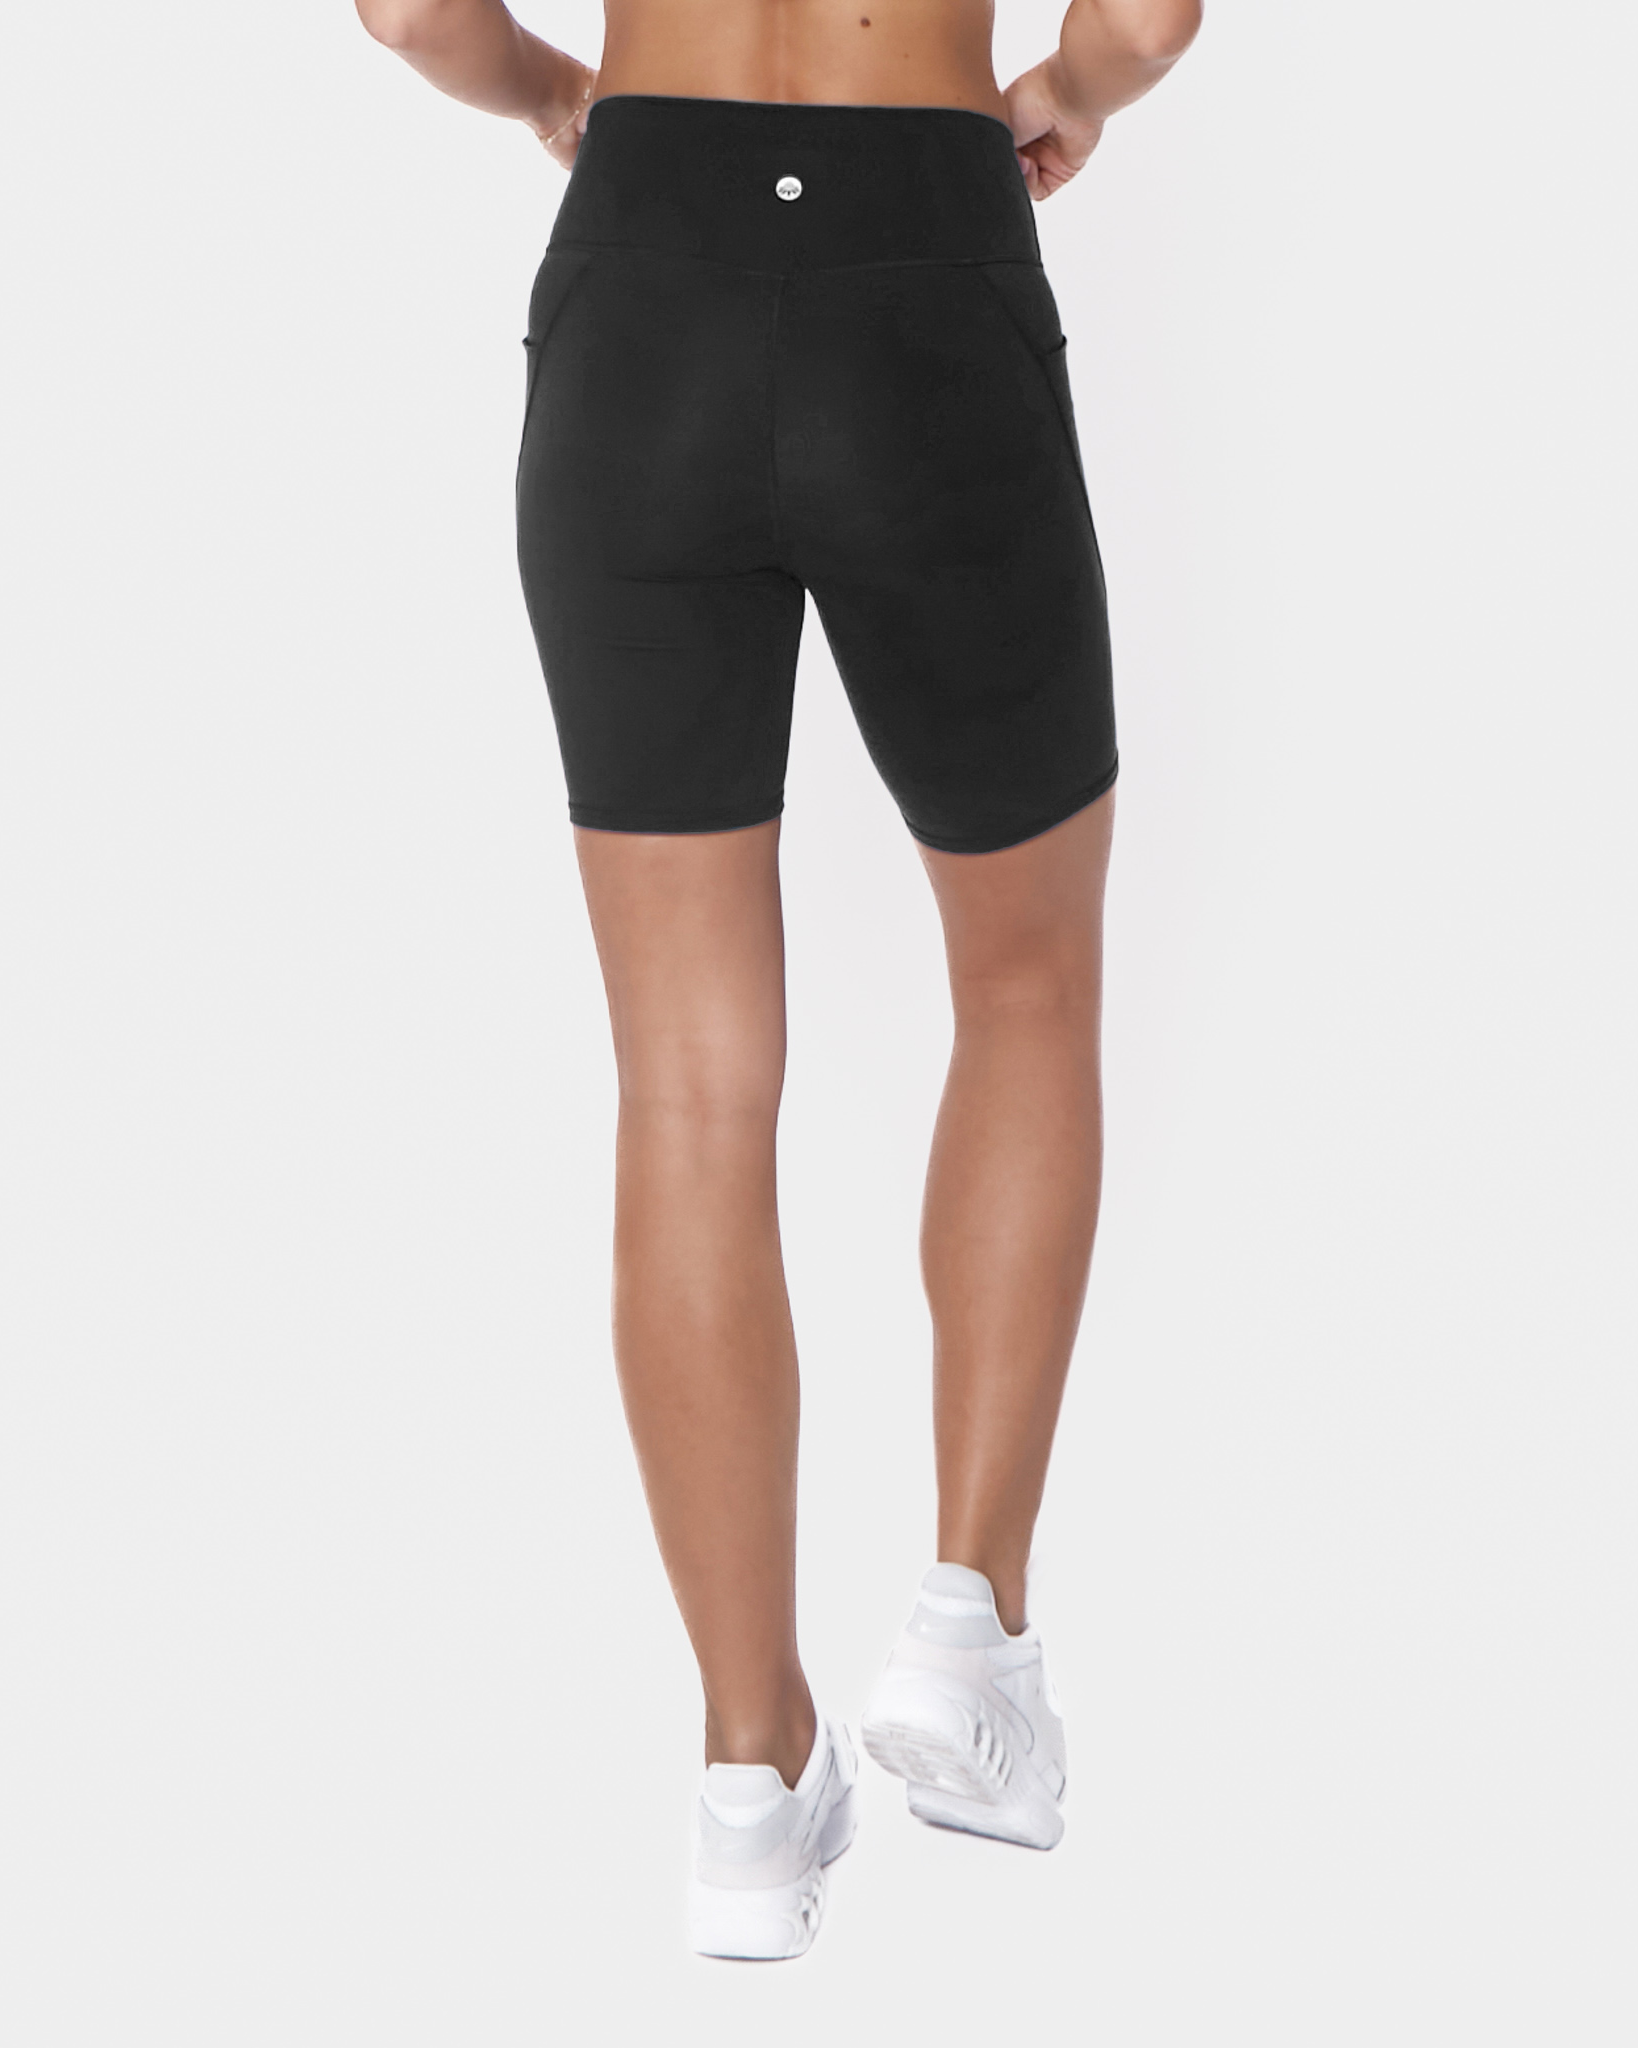 Crossover Biker Shorts Are Back - Reserve Yours Now! - Senita